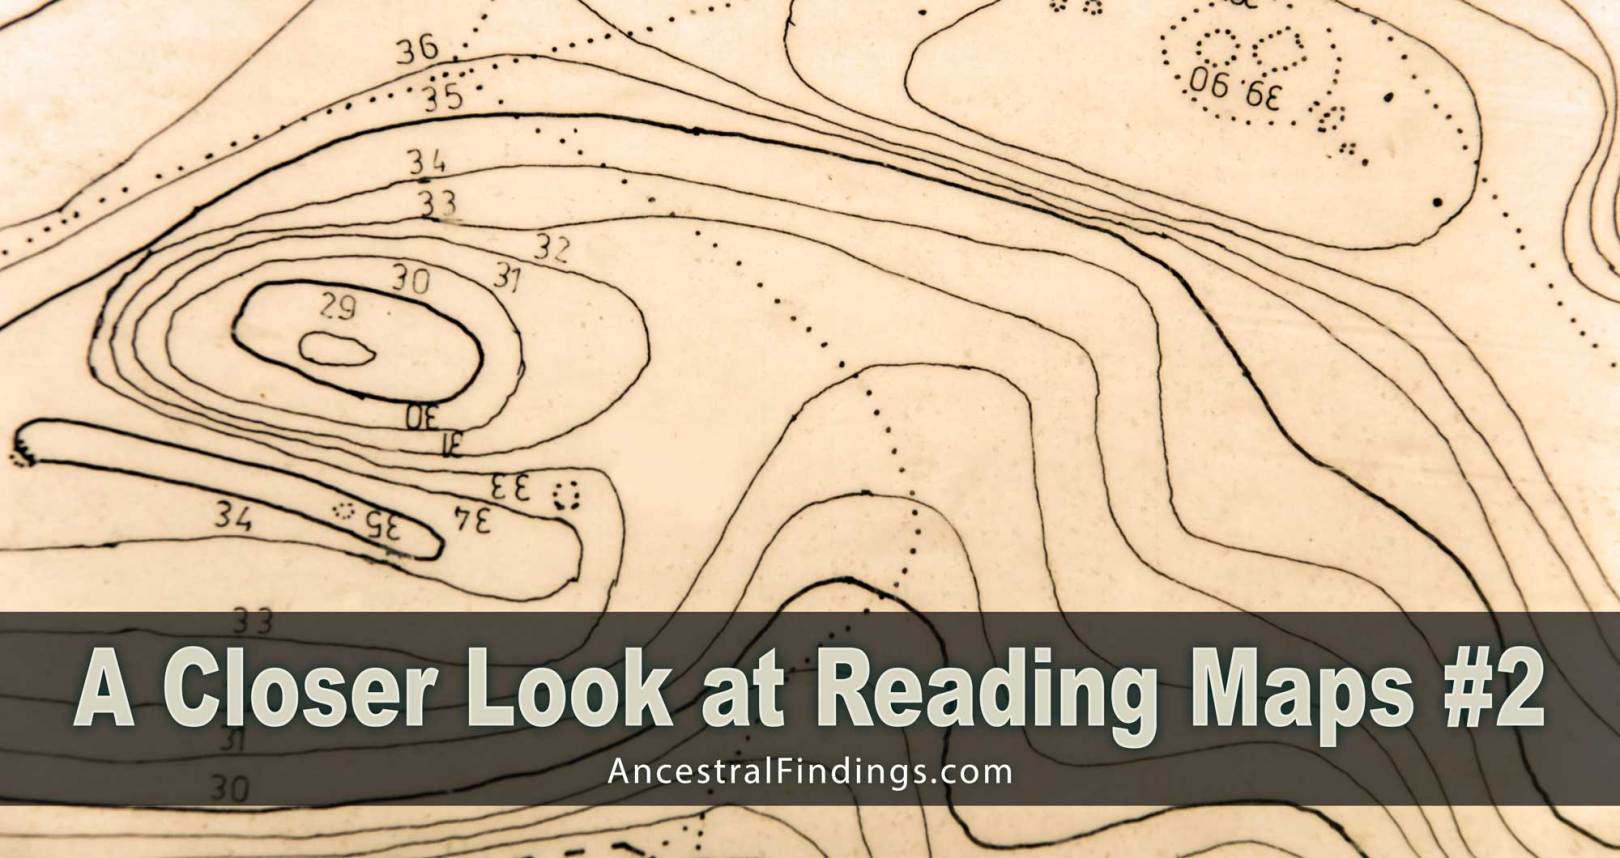 A Closer Look at Reading Maps #2